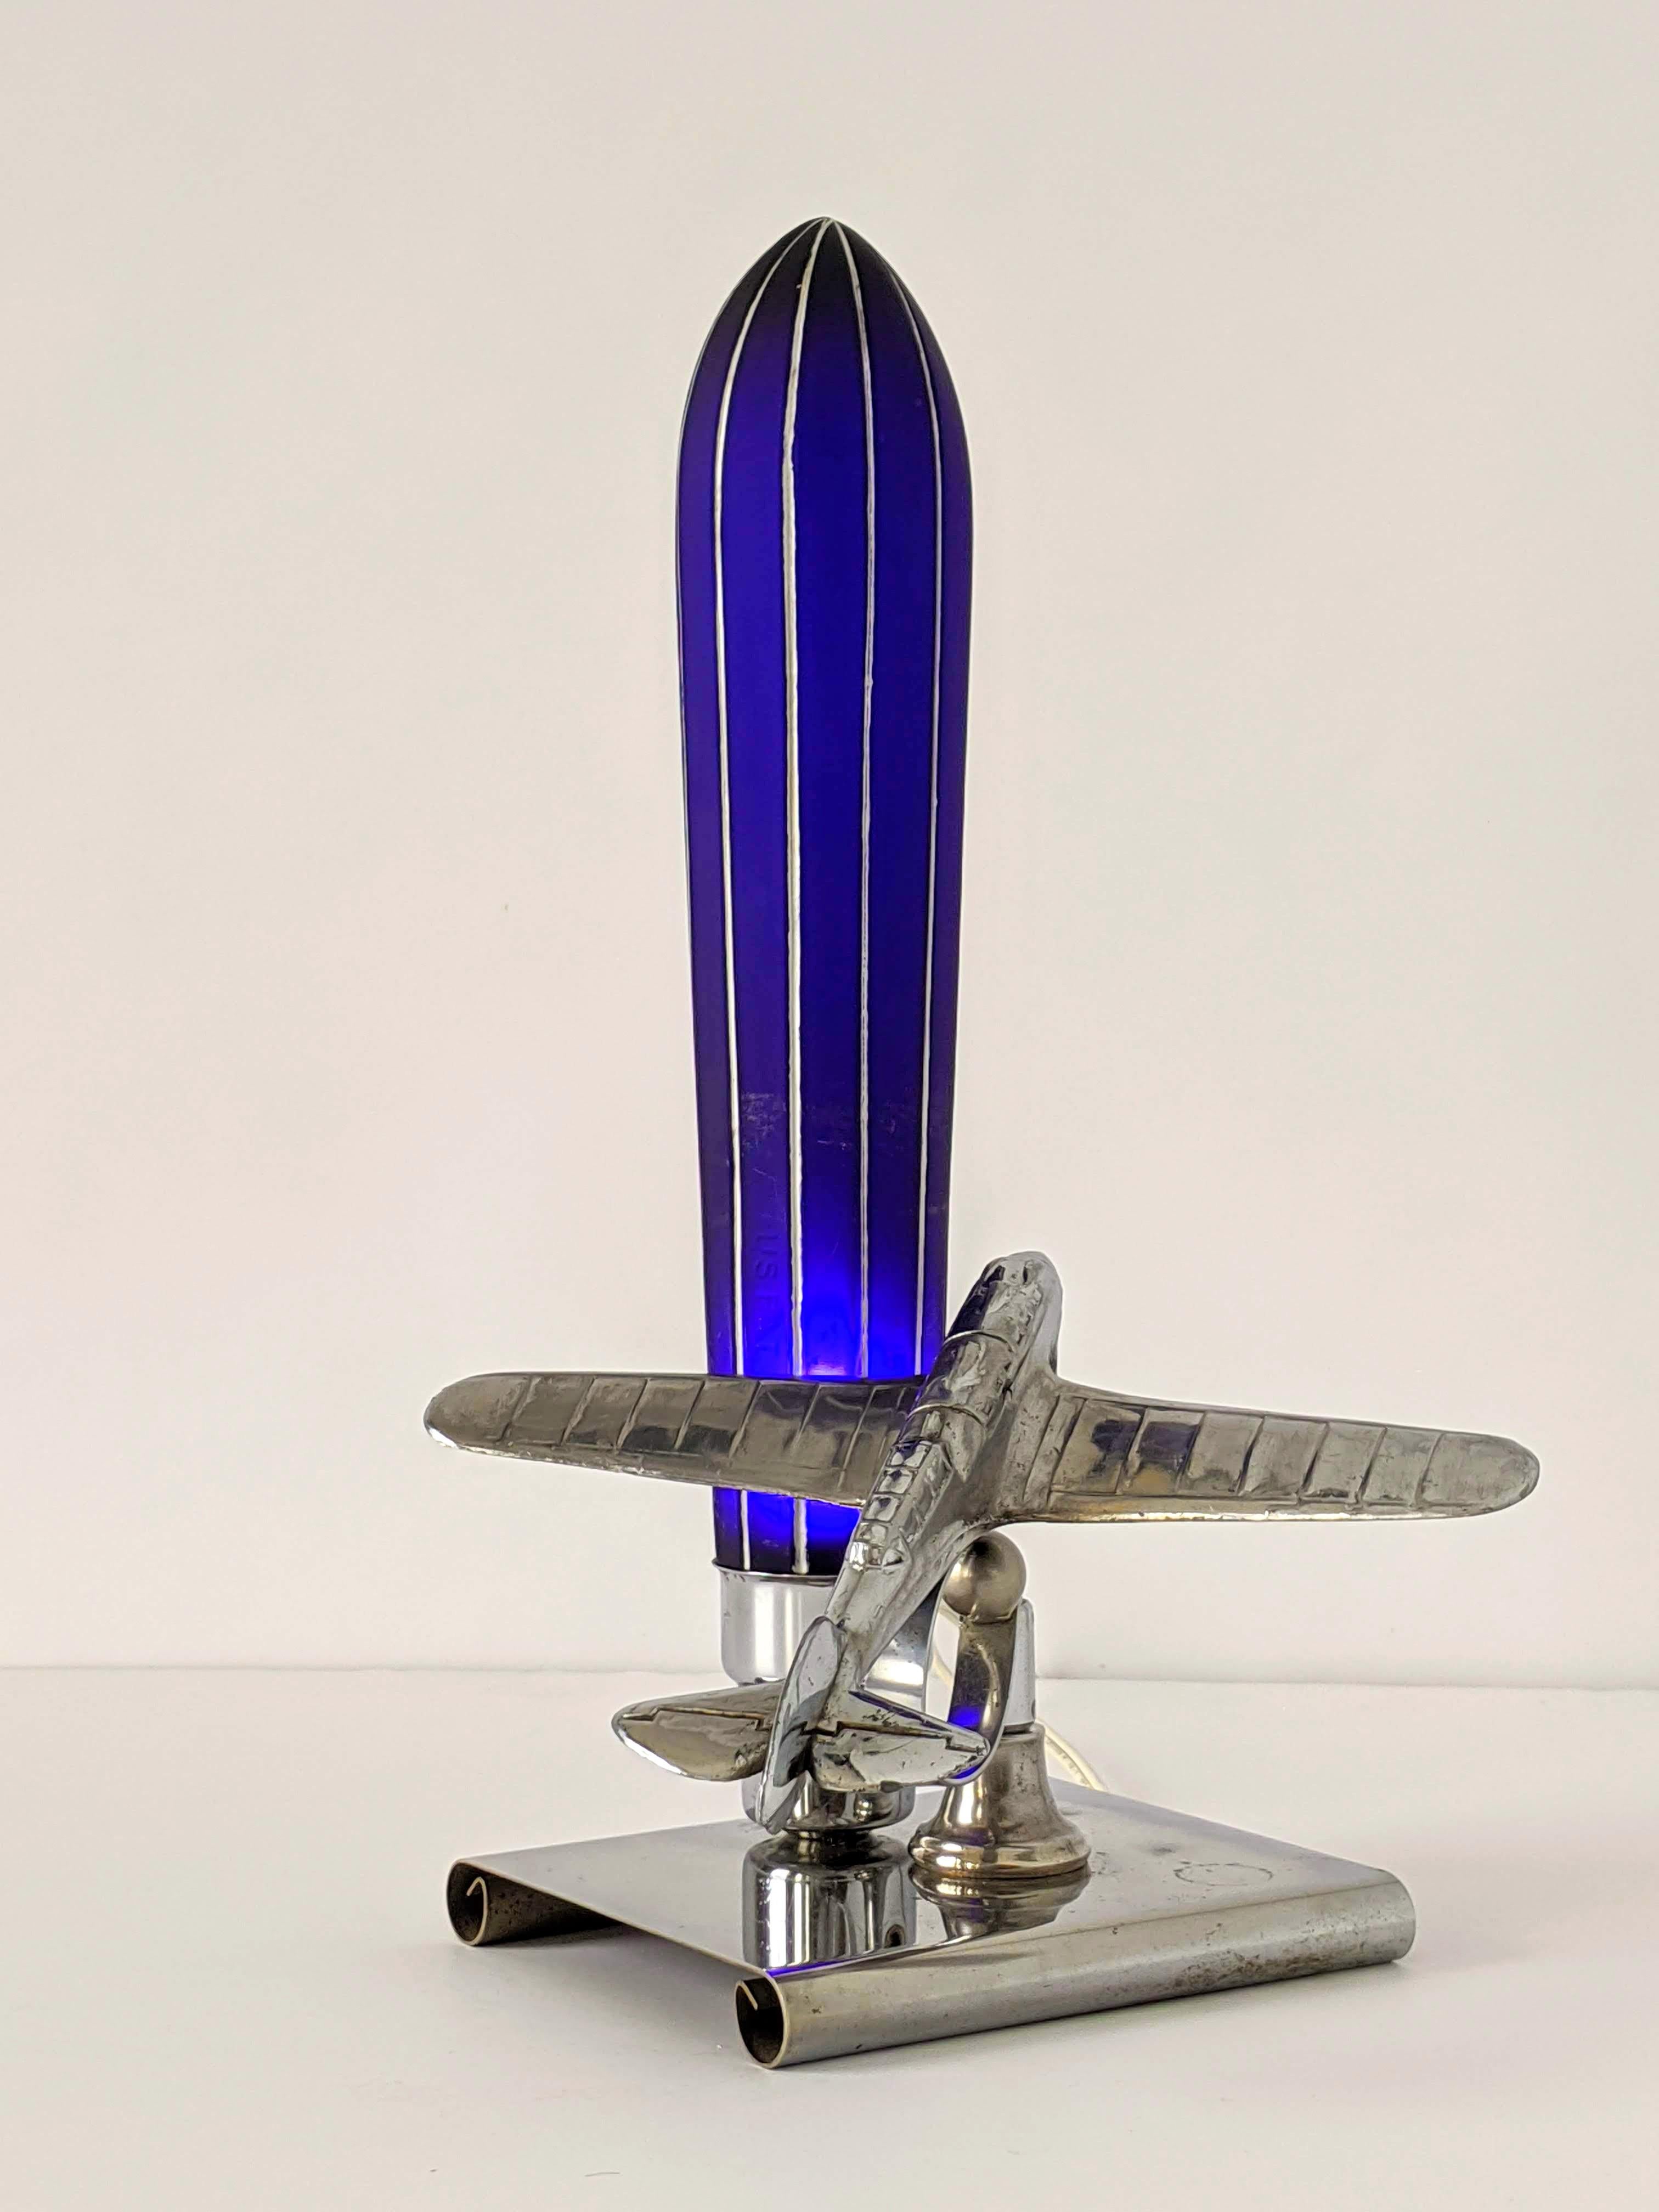 American 1930s Art Deco Chrome Airplane Table Lamp by Ray A. Schober, USA